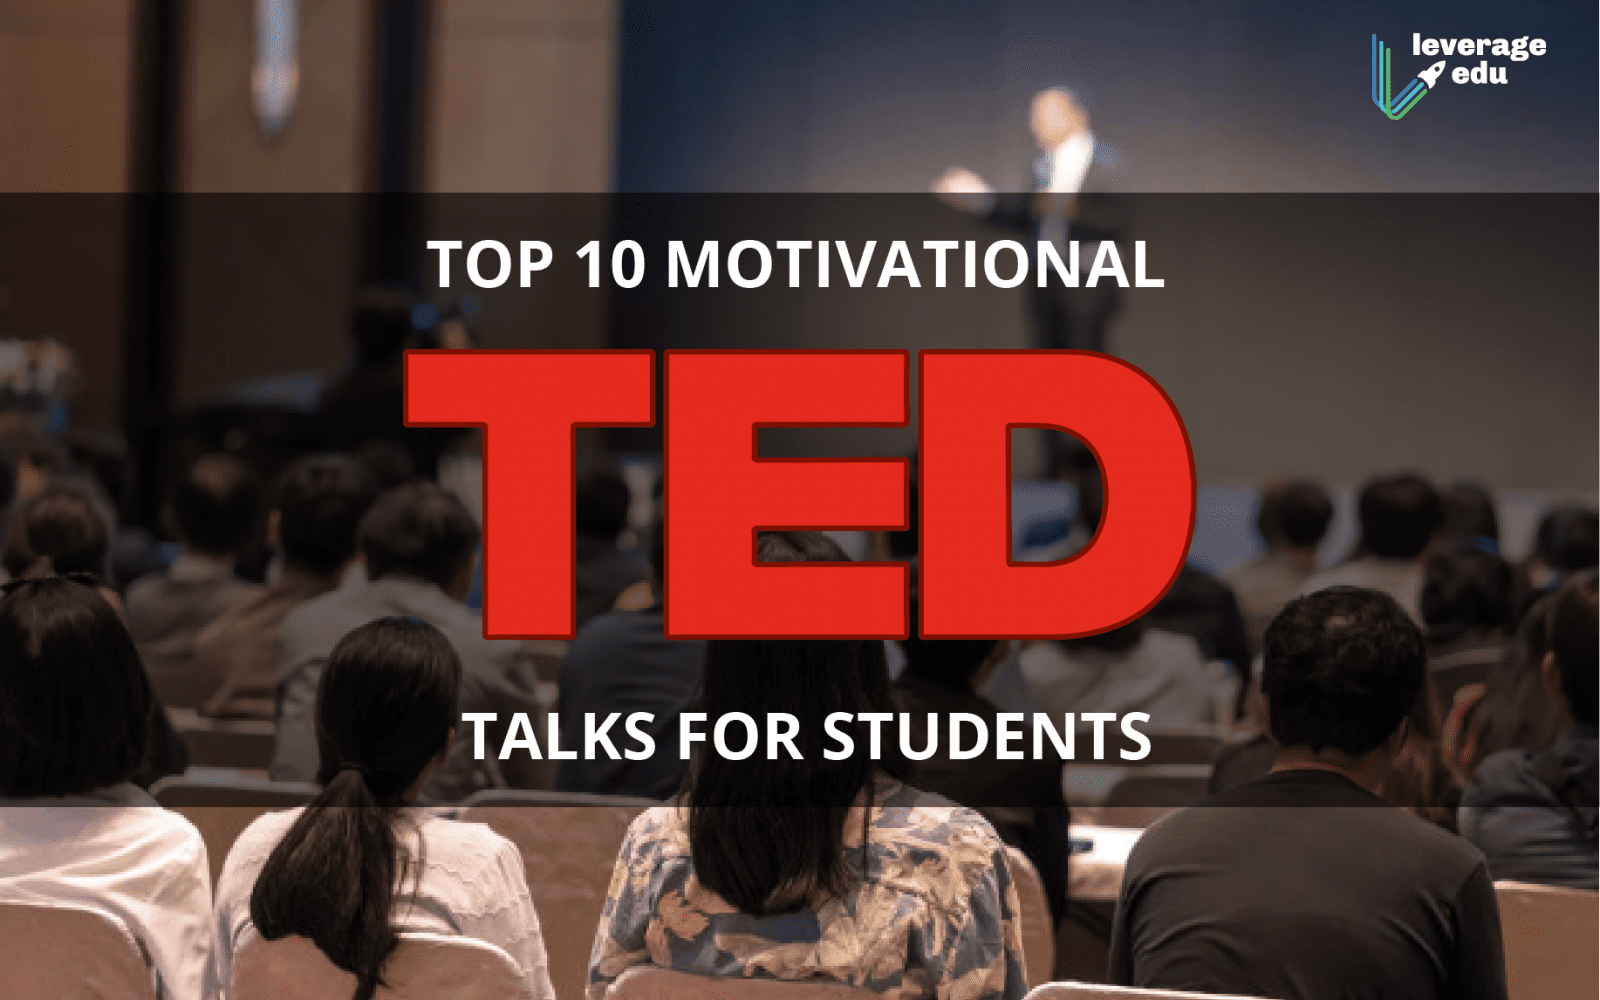 ted talk on the importance of education